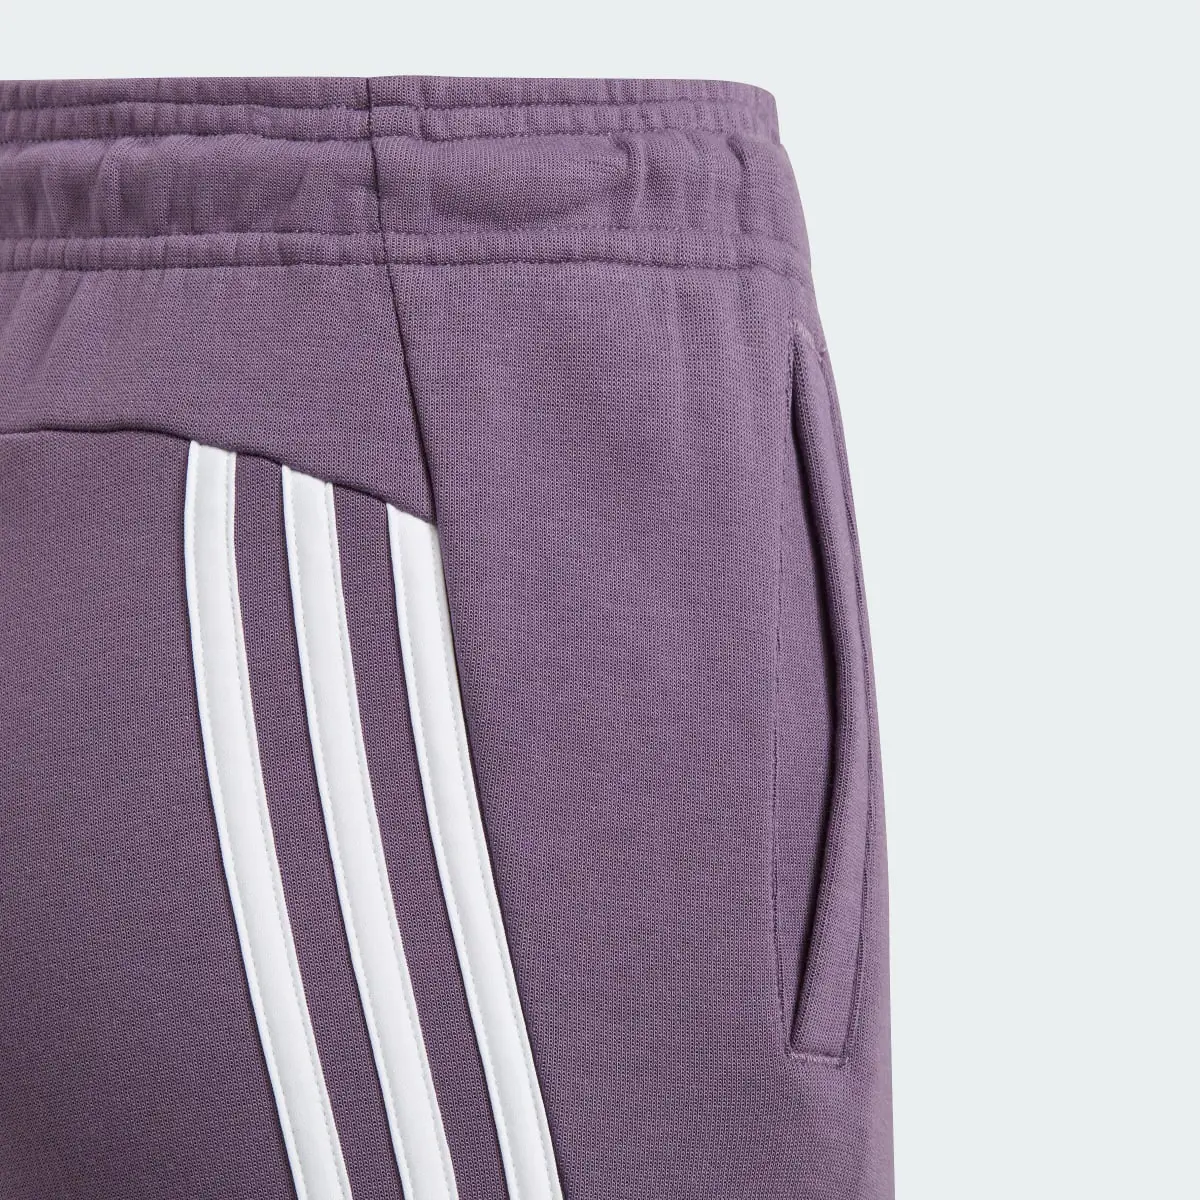 Adidas Future Icons 3-Stripes Ankle-Length Joggers. 3